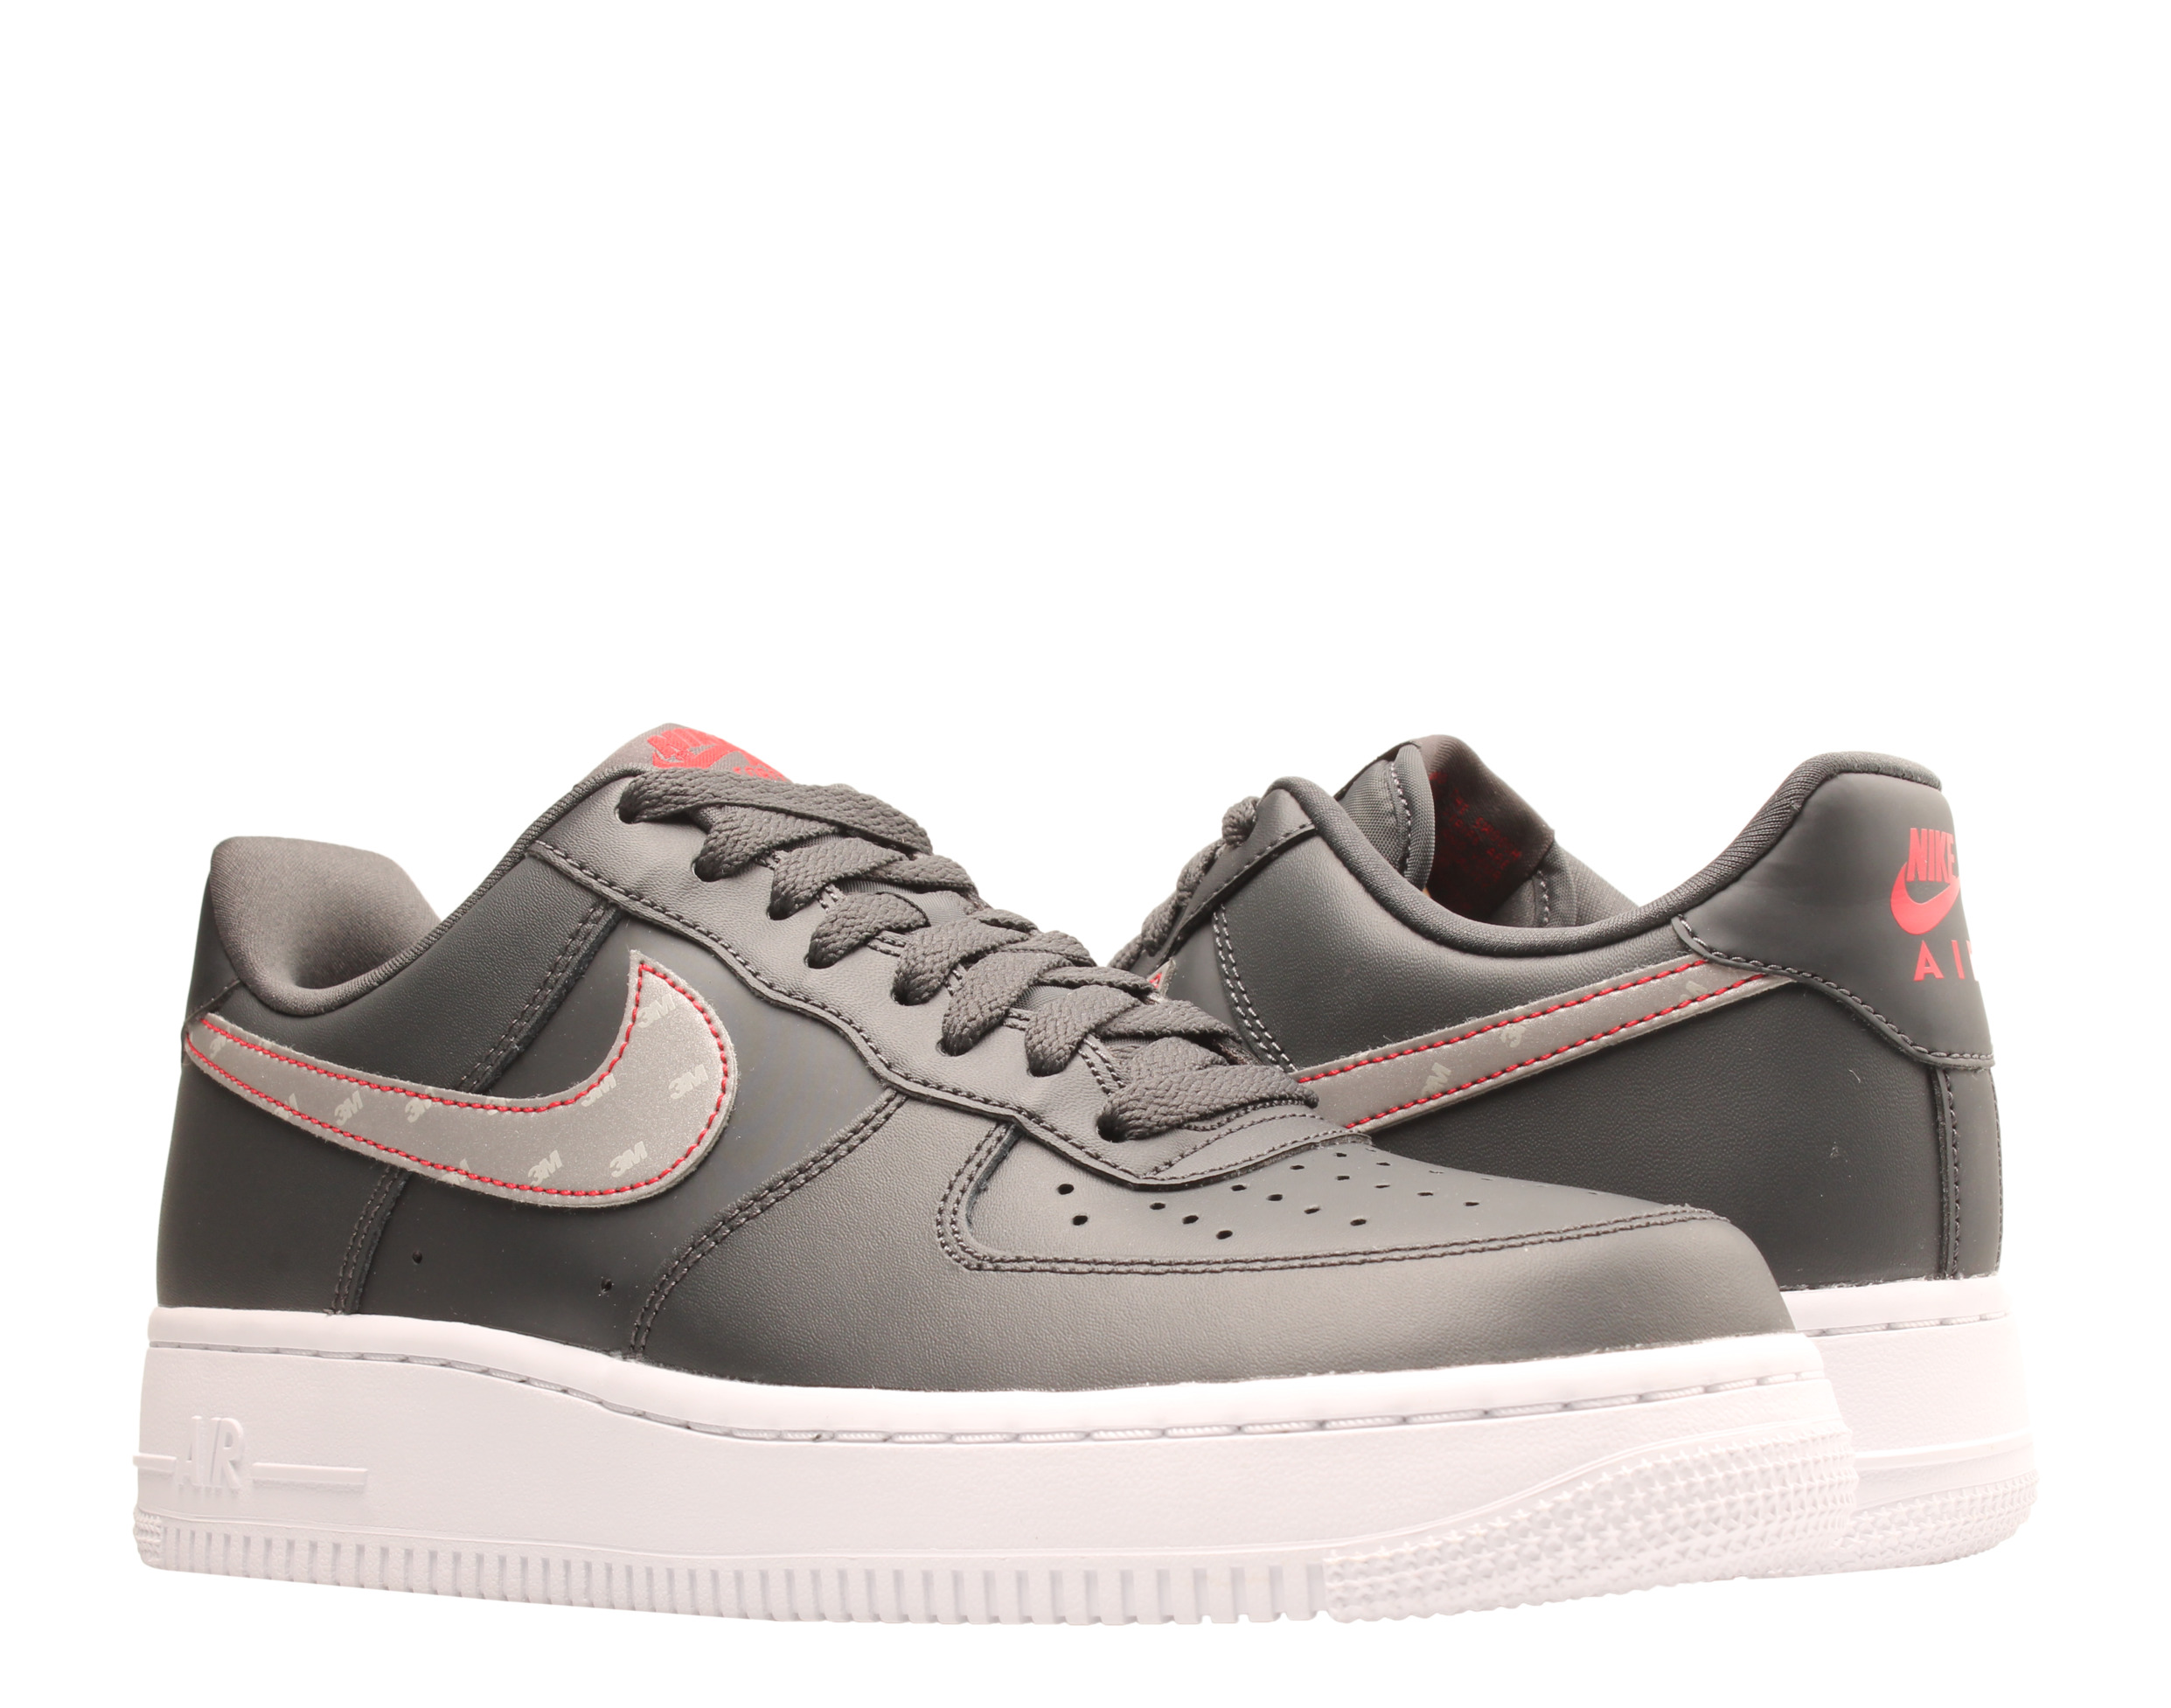 Nike Air Force 1 '07 3M Anthracite/Silver Men's Basketball Shoes CT2296-003